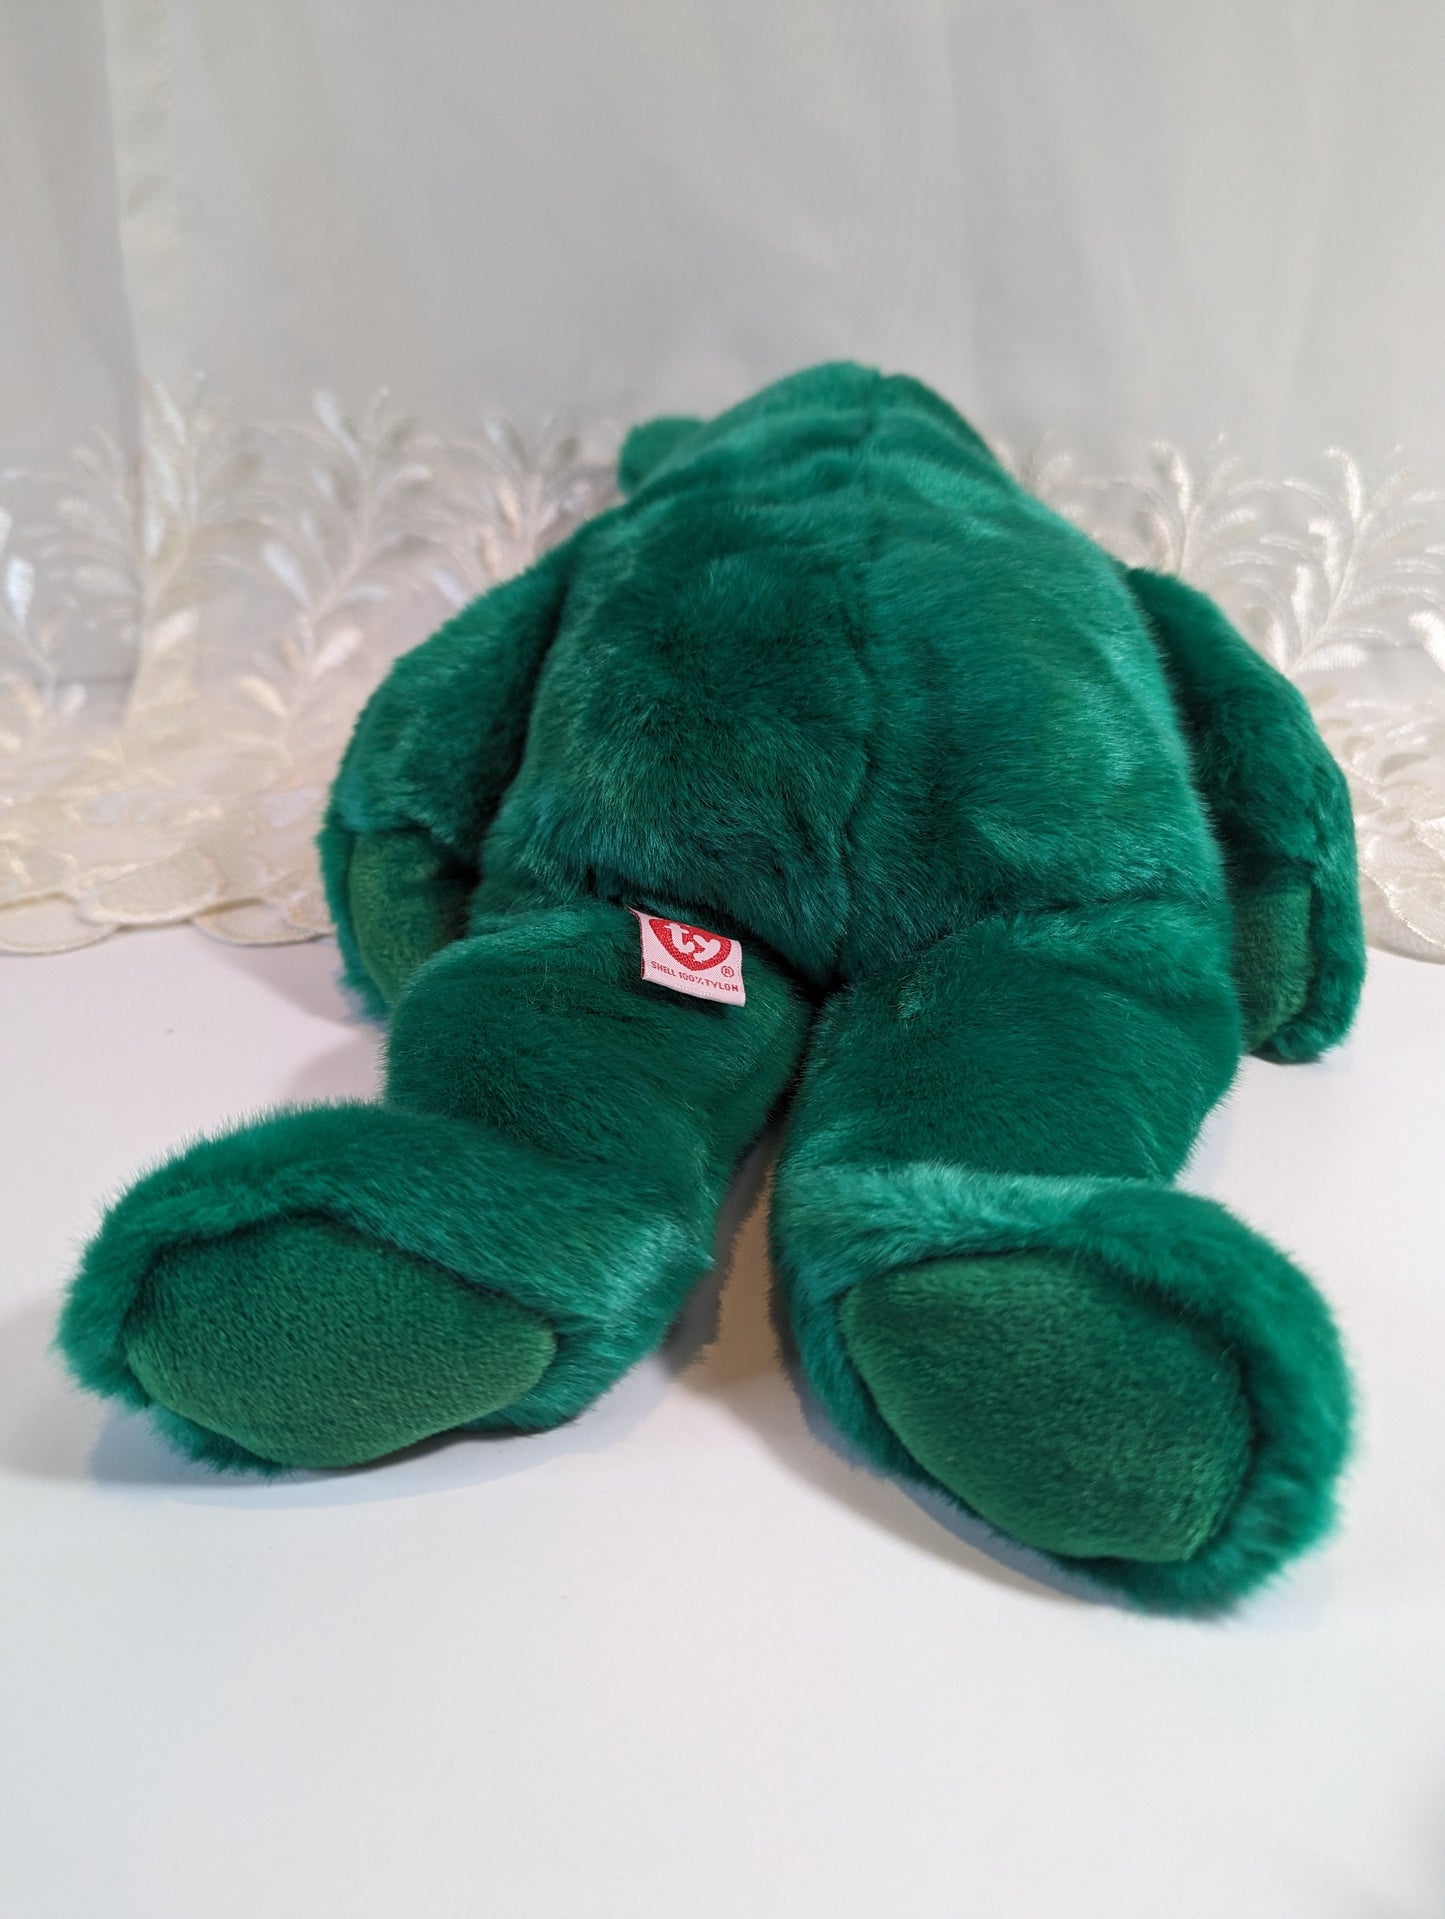 Ty Beanie Buddy - Erin The St Patrick's Day Bear (14in) - Vintage Beanies Canada